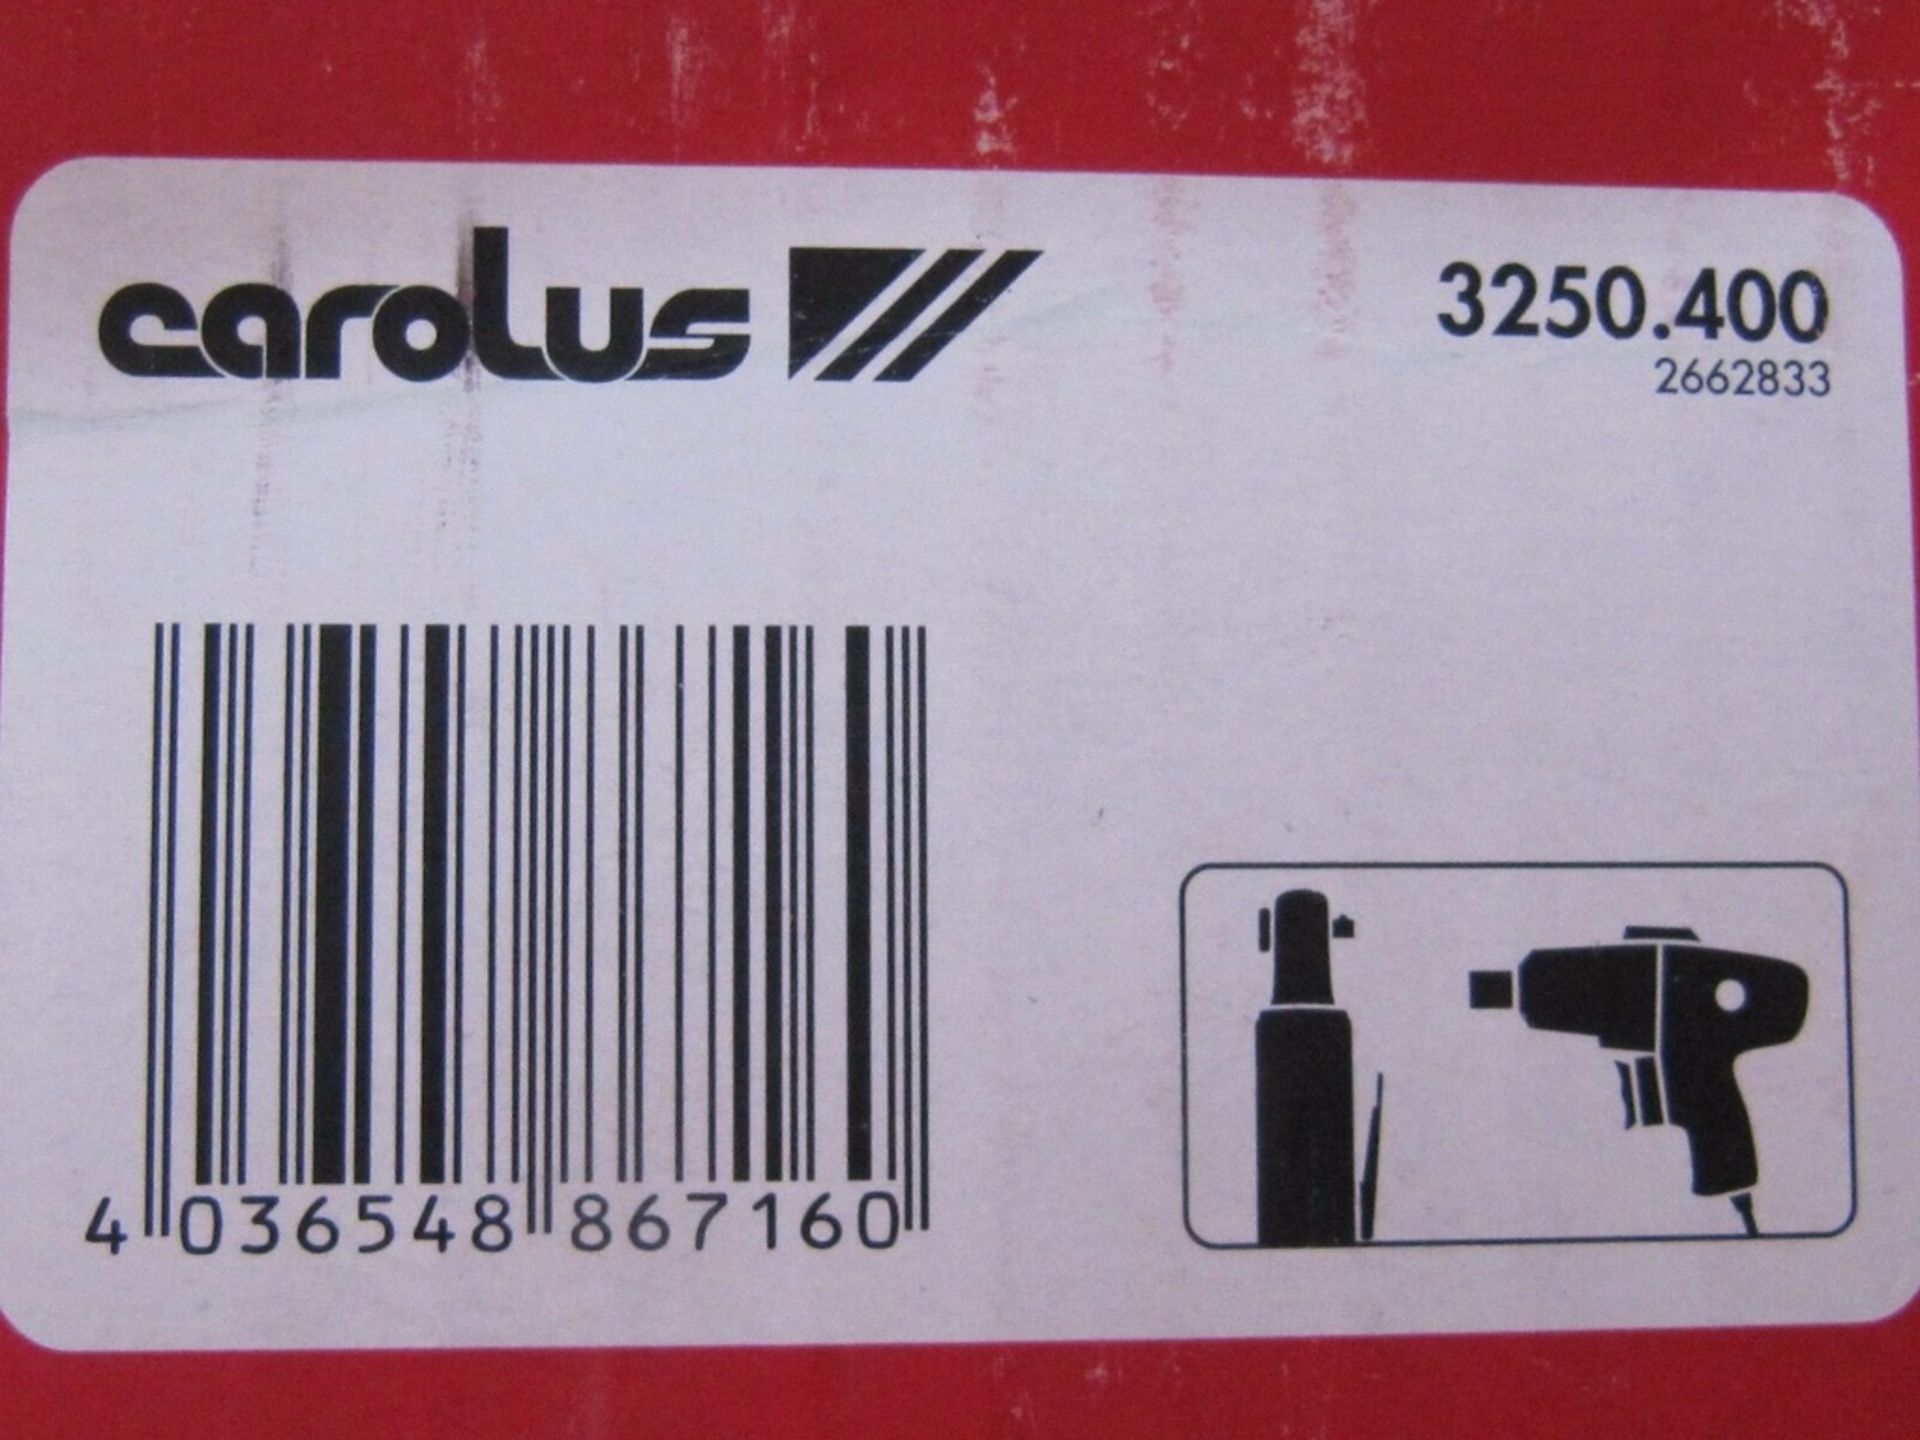 Carolus Air Grinder. 3250.400 no vat on hammer.You will get 1 of these.Brand new and unused. - Image 4 of 4